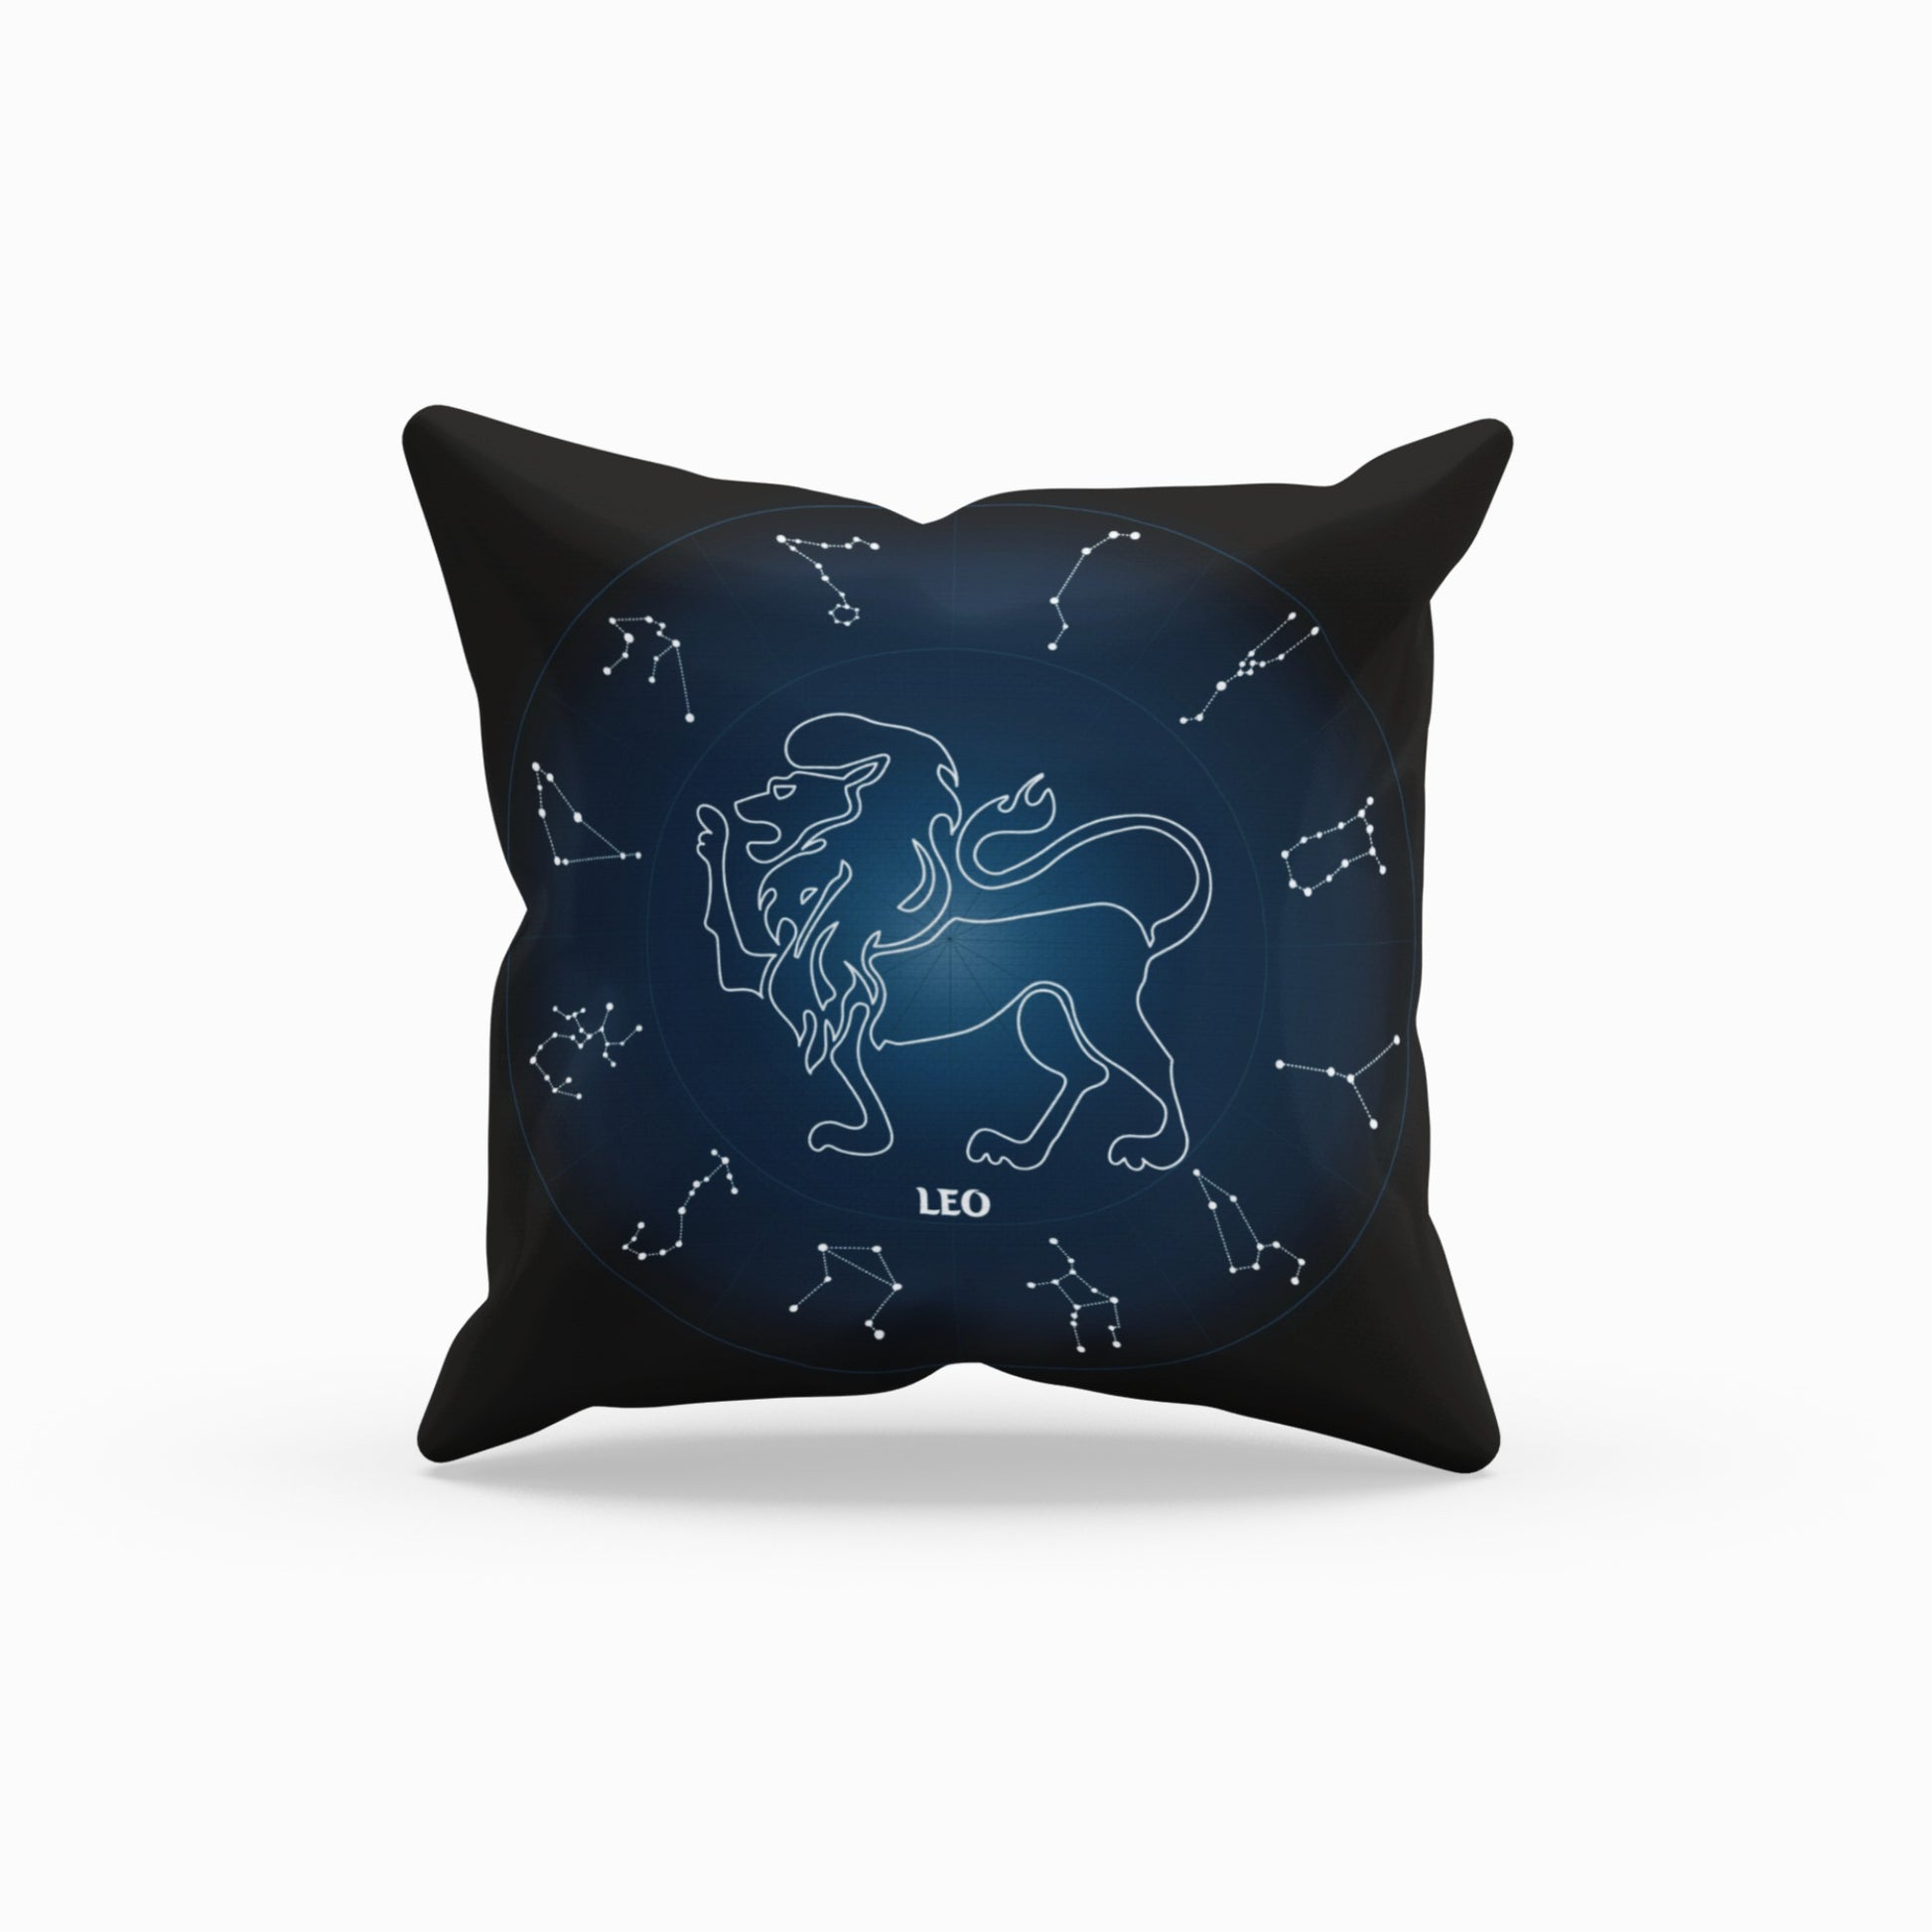 Charming Astrology Accent Pillowcase